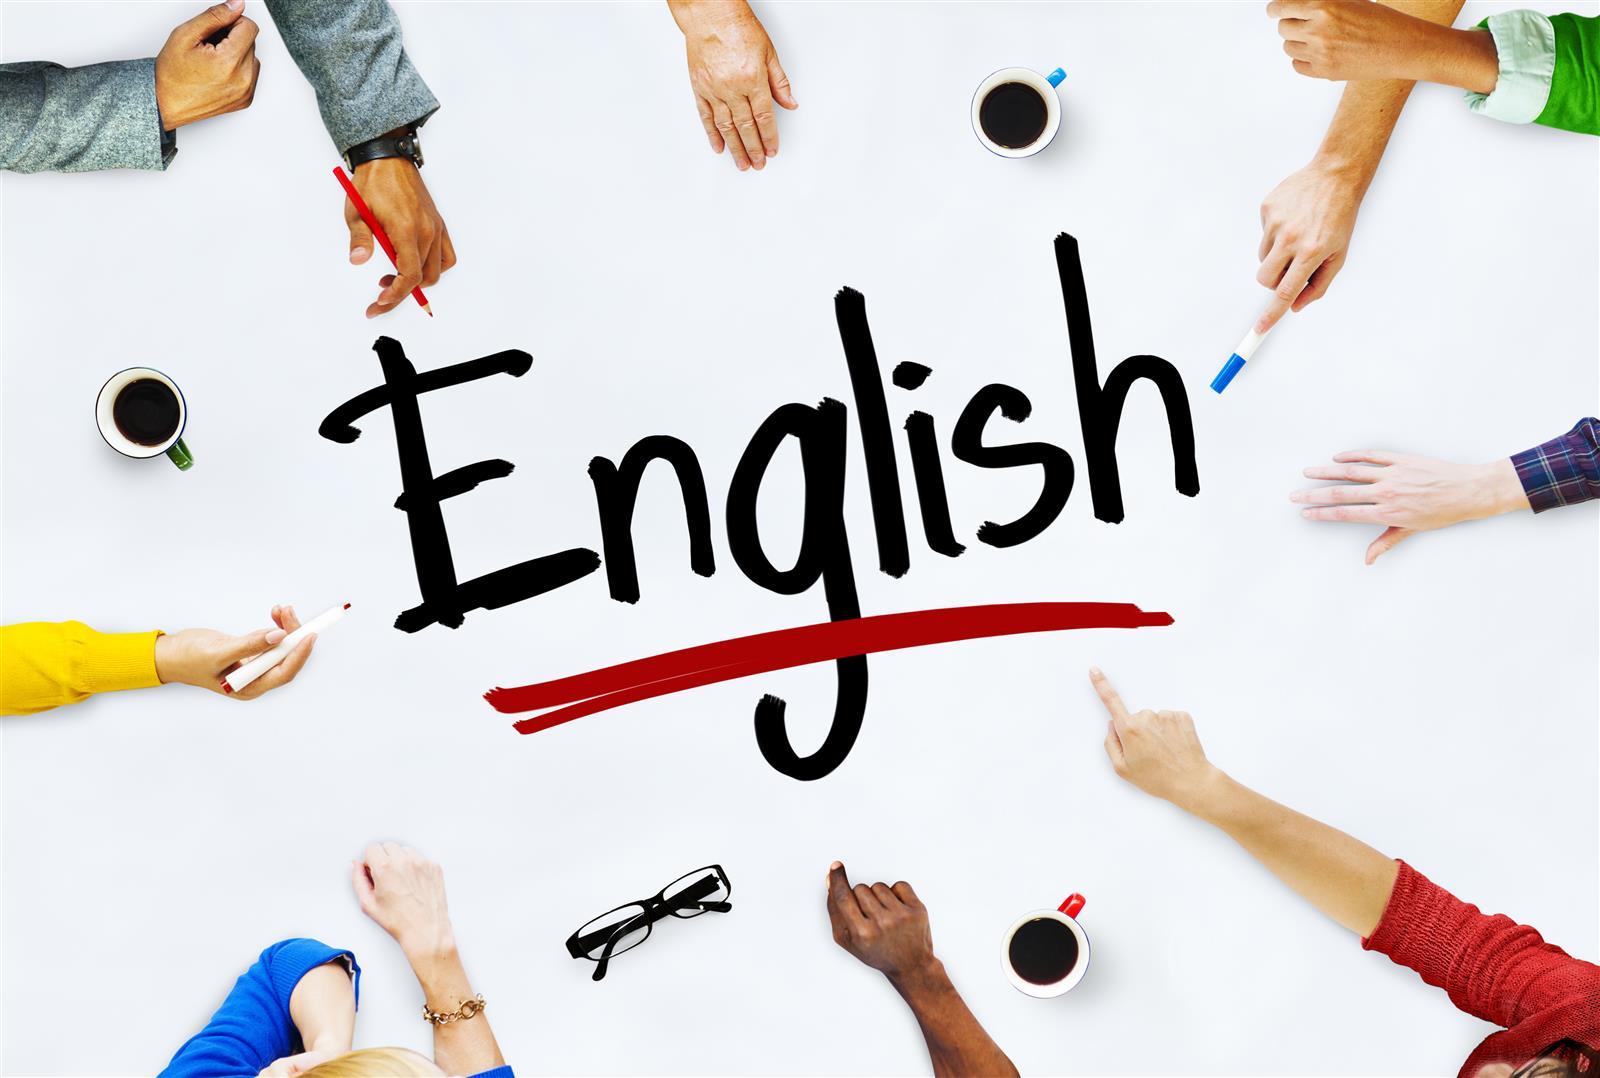 Learn English Online - Why is it Better?